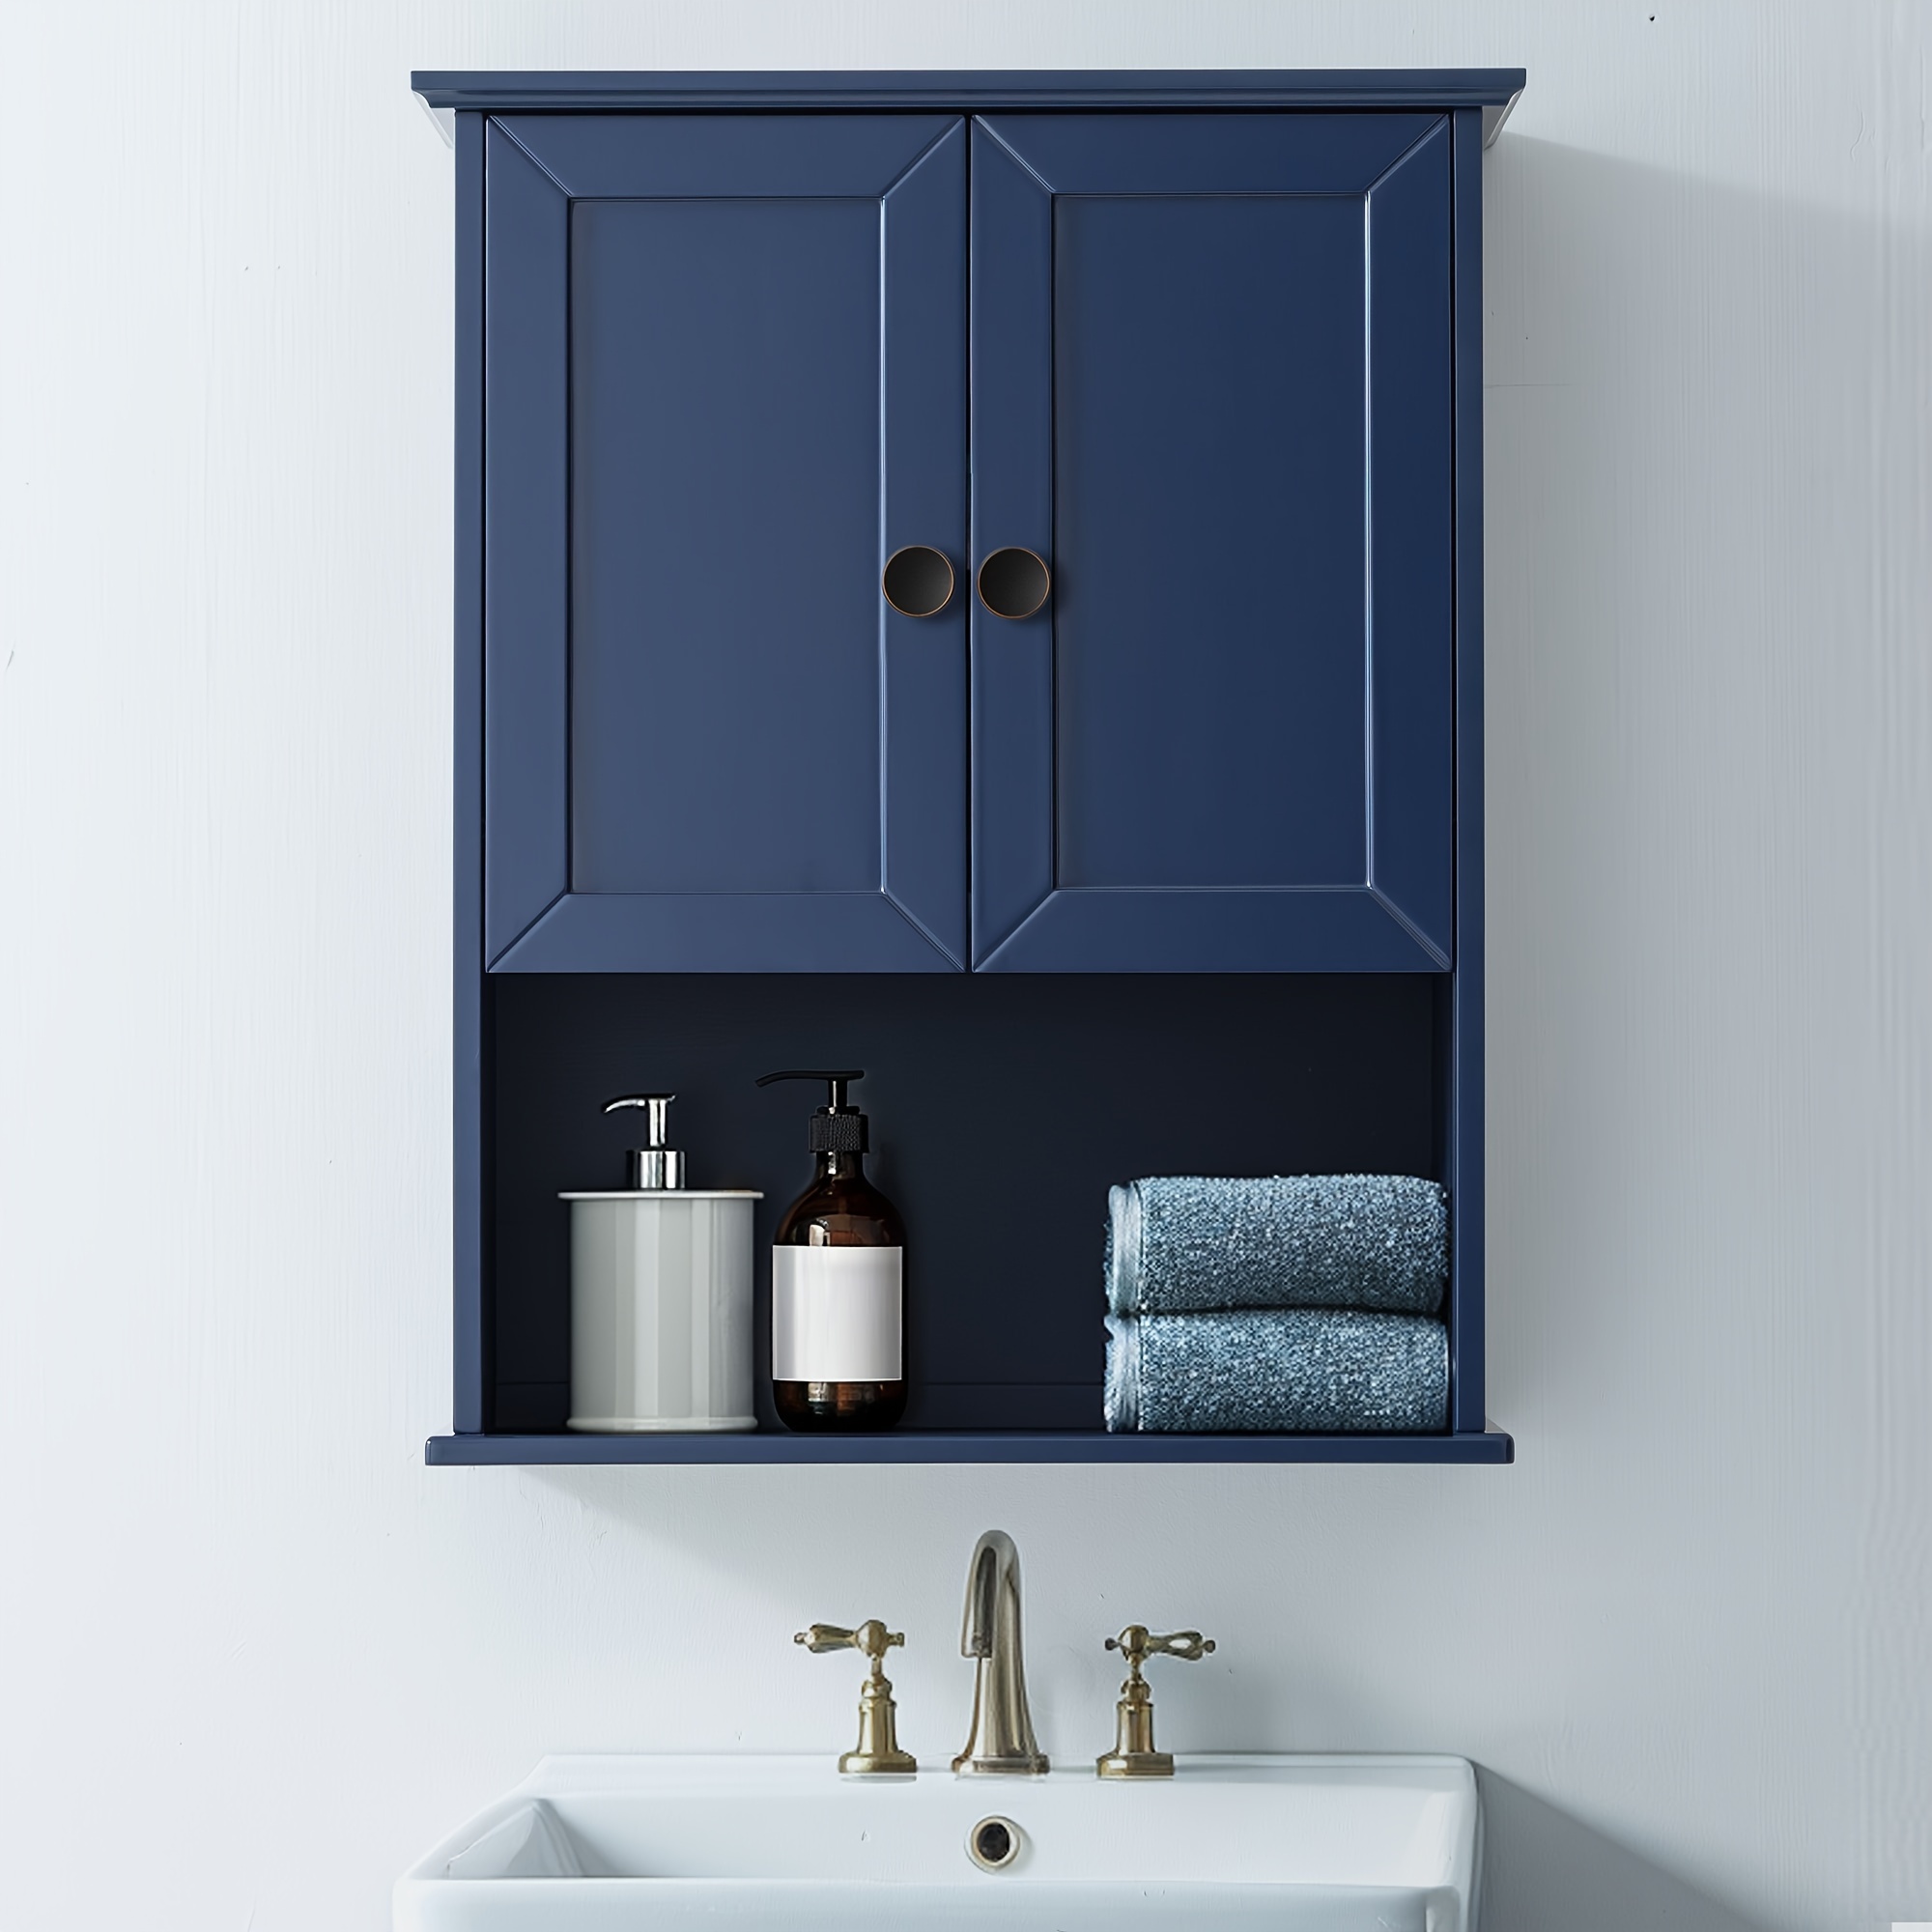 

Blue Medicine Cabinet, Wall Mounted Cabinet 24x30 Inch Wooden Over The Toilet Storage Cabinets With 2 Doors, Above Toilet Storage Hanging Cabinets For Bathroom Laundry Room Bedroom Kitchen Cupboard